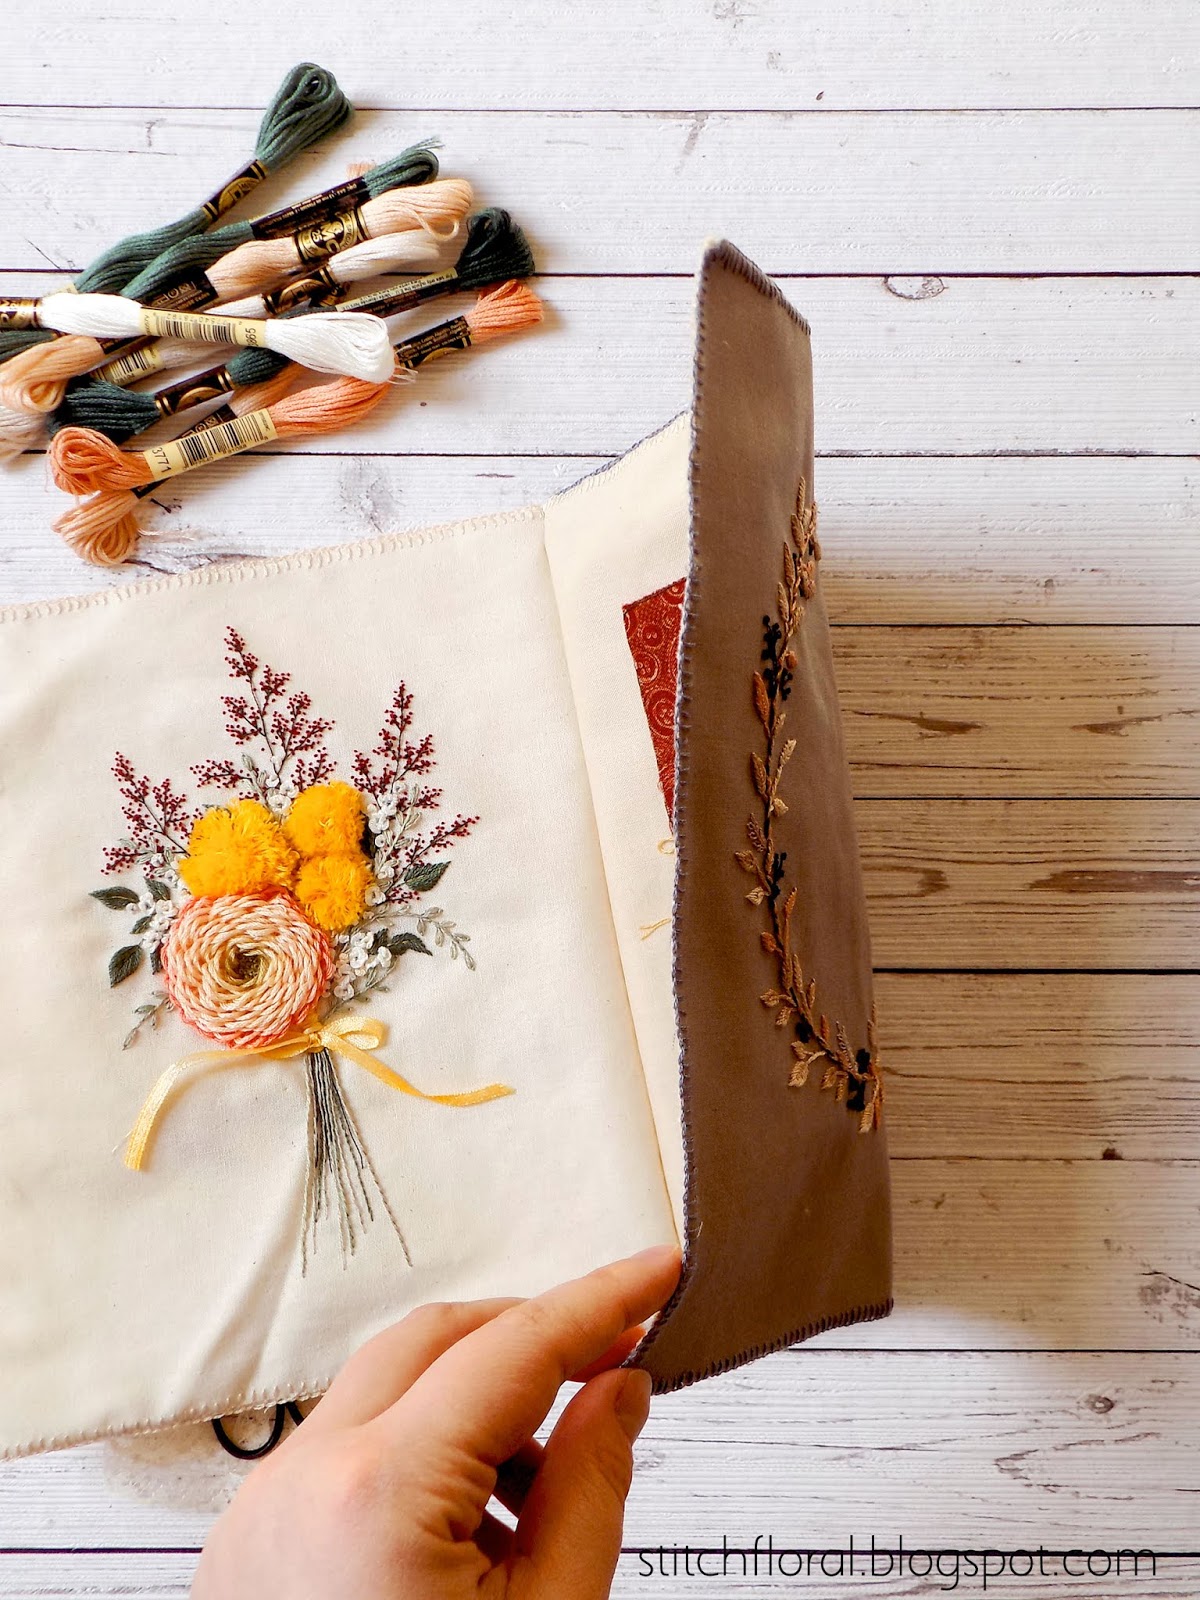 Embroidery Journal: repurposing old works as pages. Tutorial. - Stitch  Floral